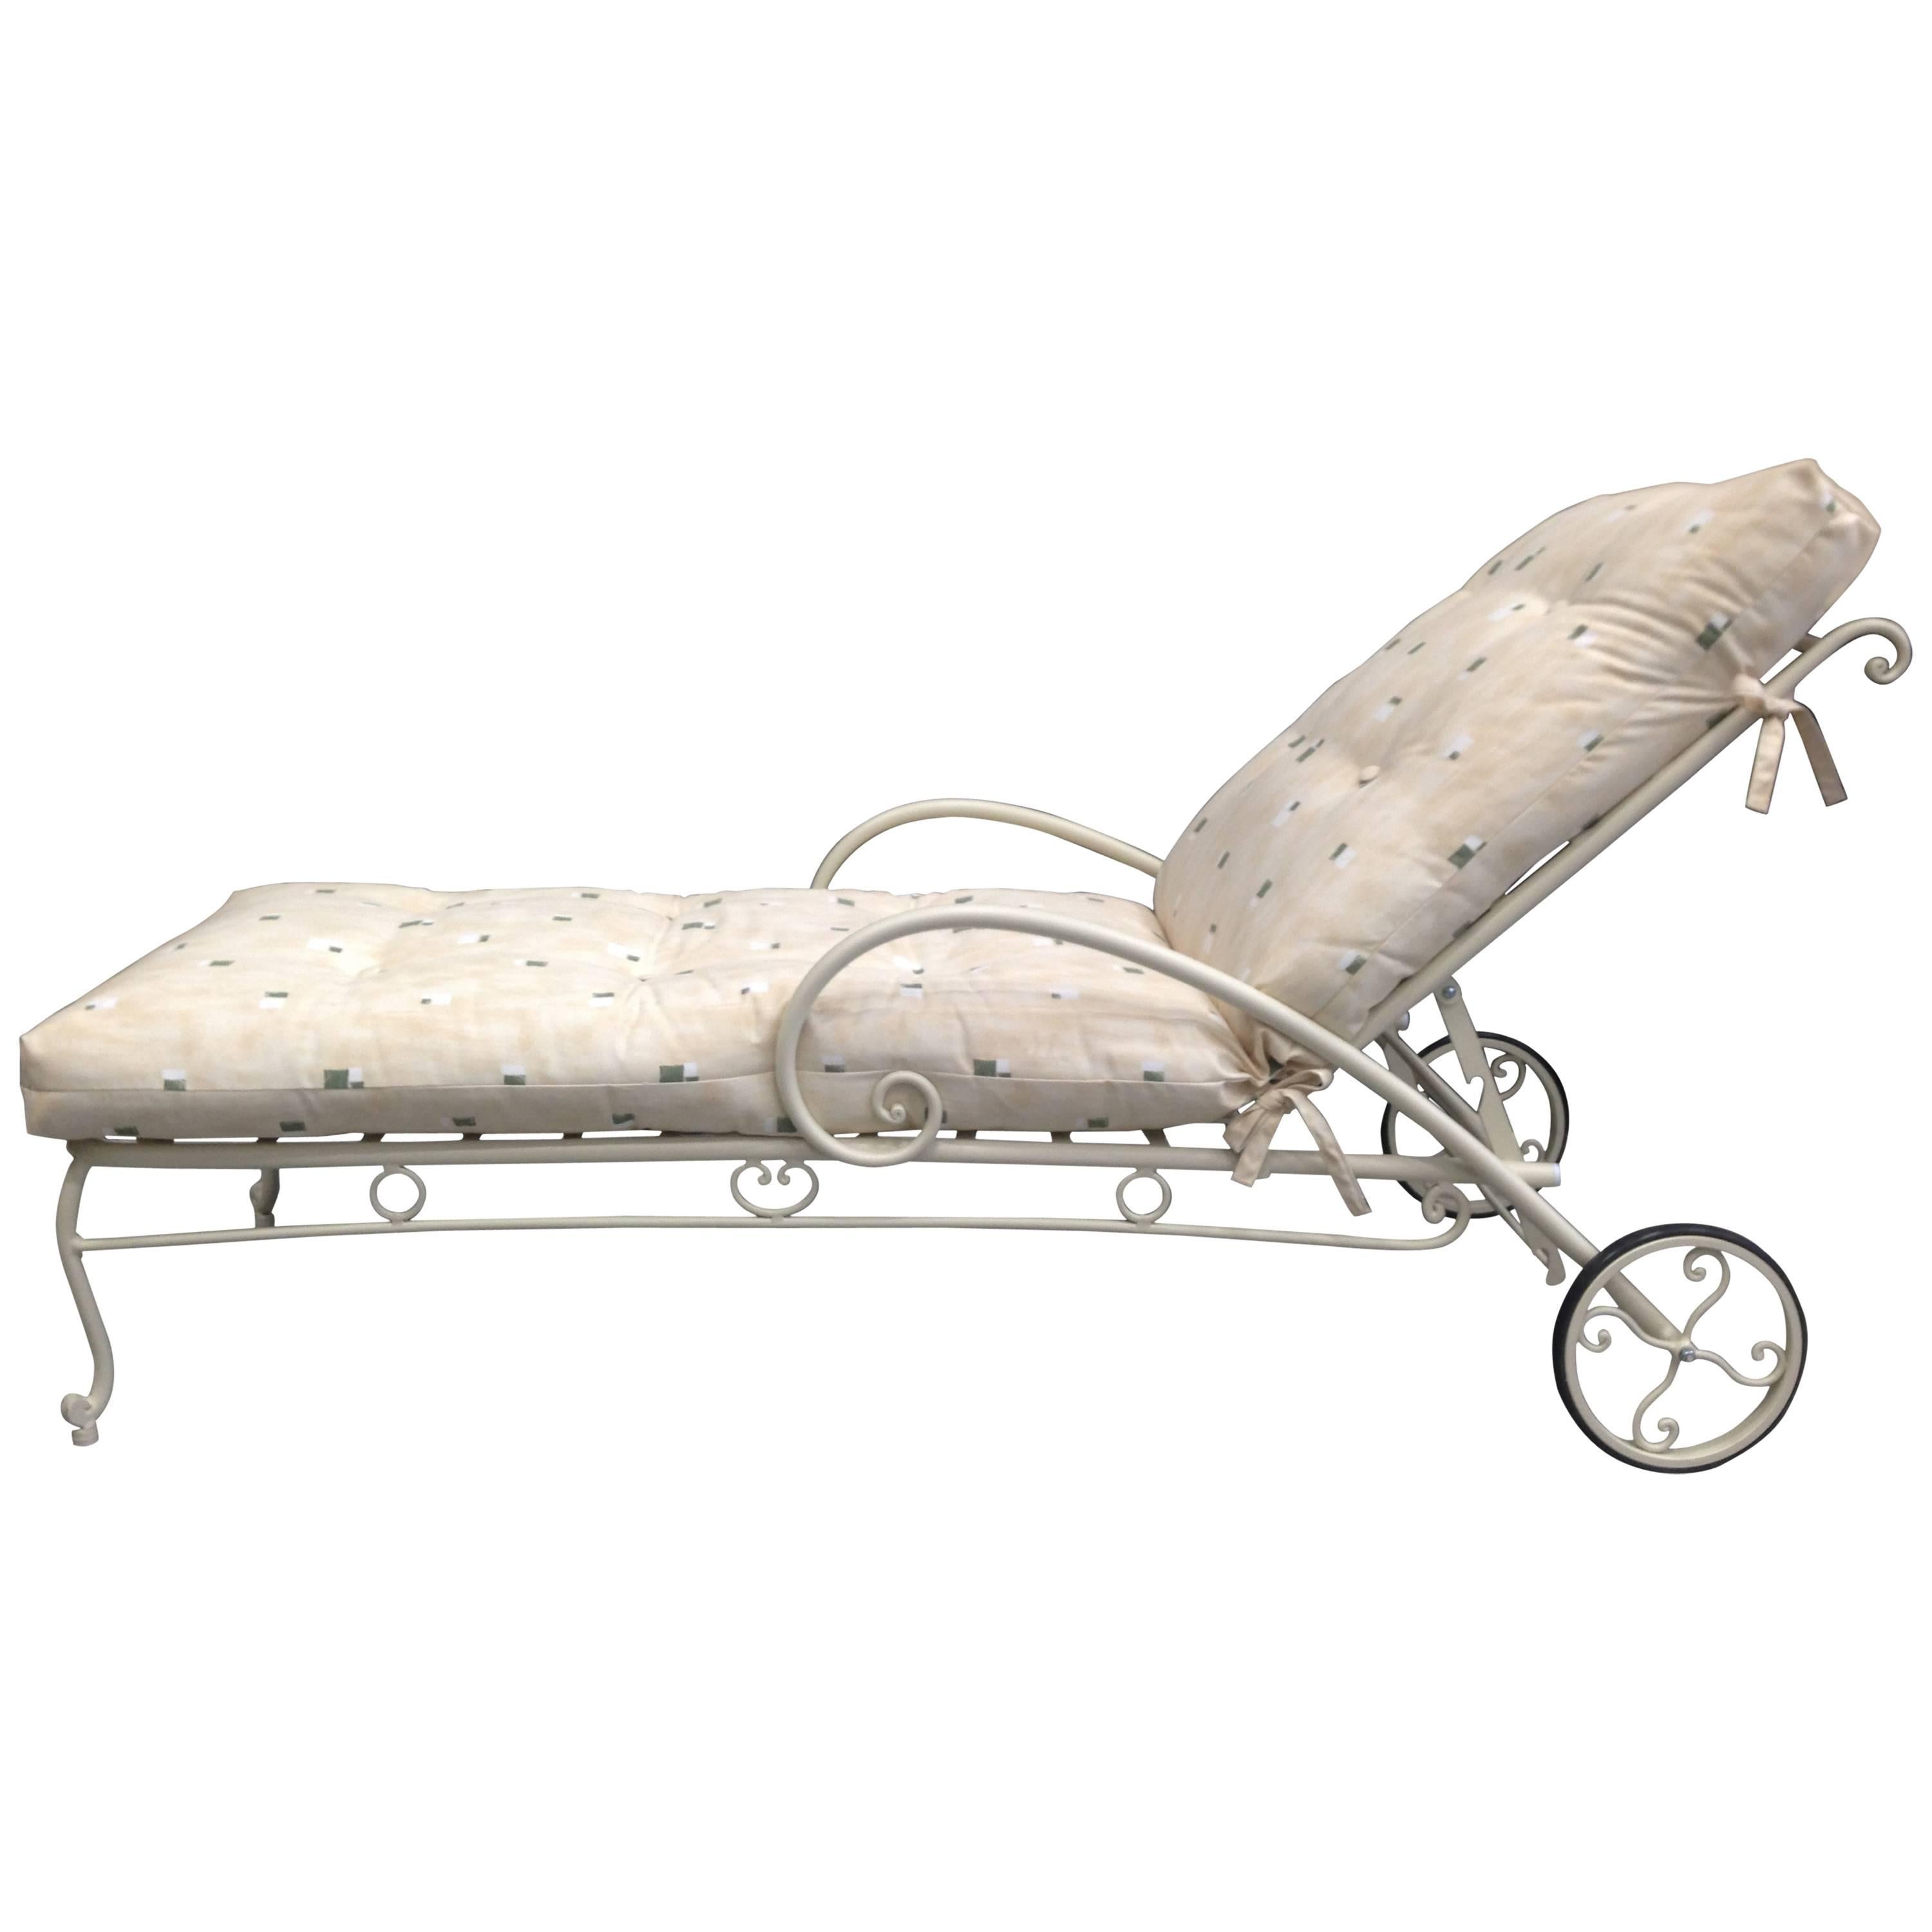 Adjustable Chaise Longue with Wheels.Garden furniture